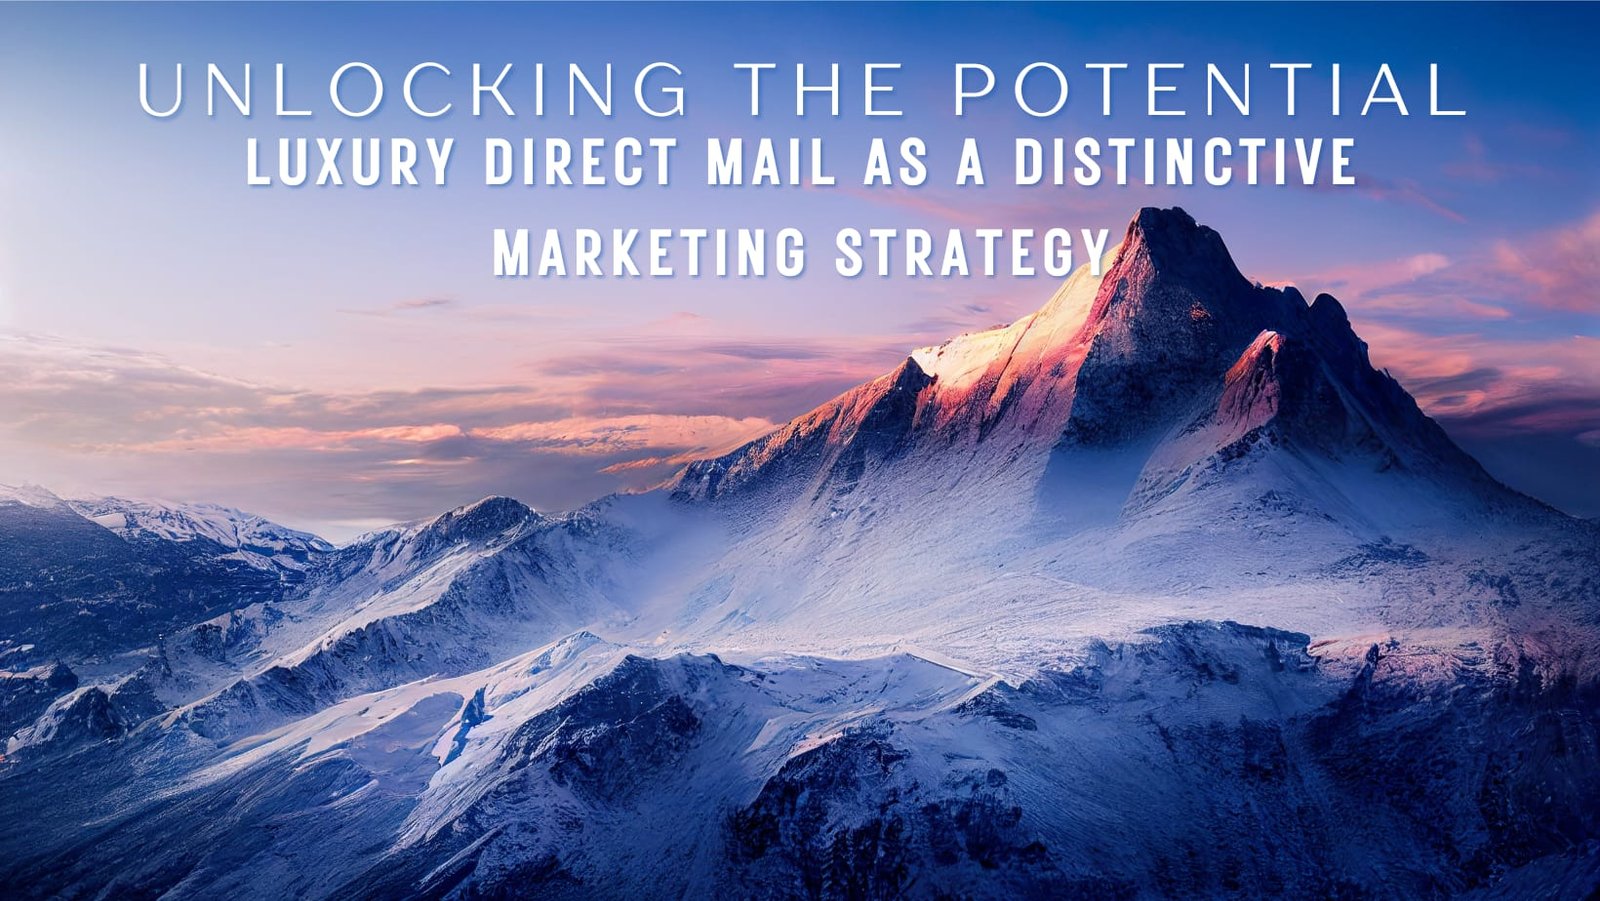 Unlocking the Potential: Luxury Direct Mail as a Distinctive Marketing Strategy